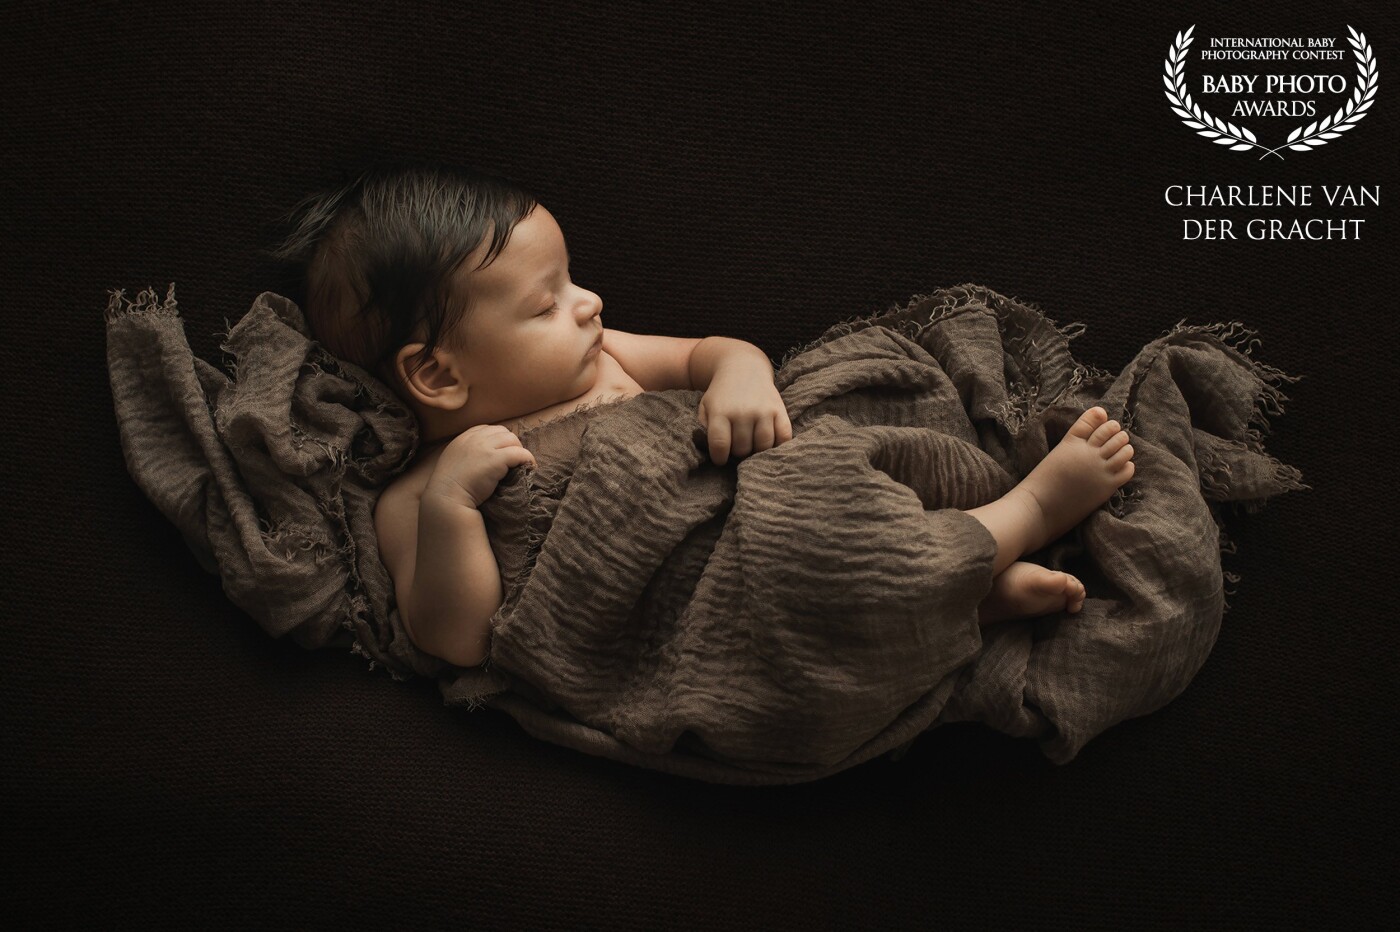 The parents of this beautiful baby have hung this photo in a very large size on the wall as real art. For this reason, you have your newborn photographed if you ask me. A photo to enjoy every day.